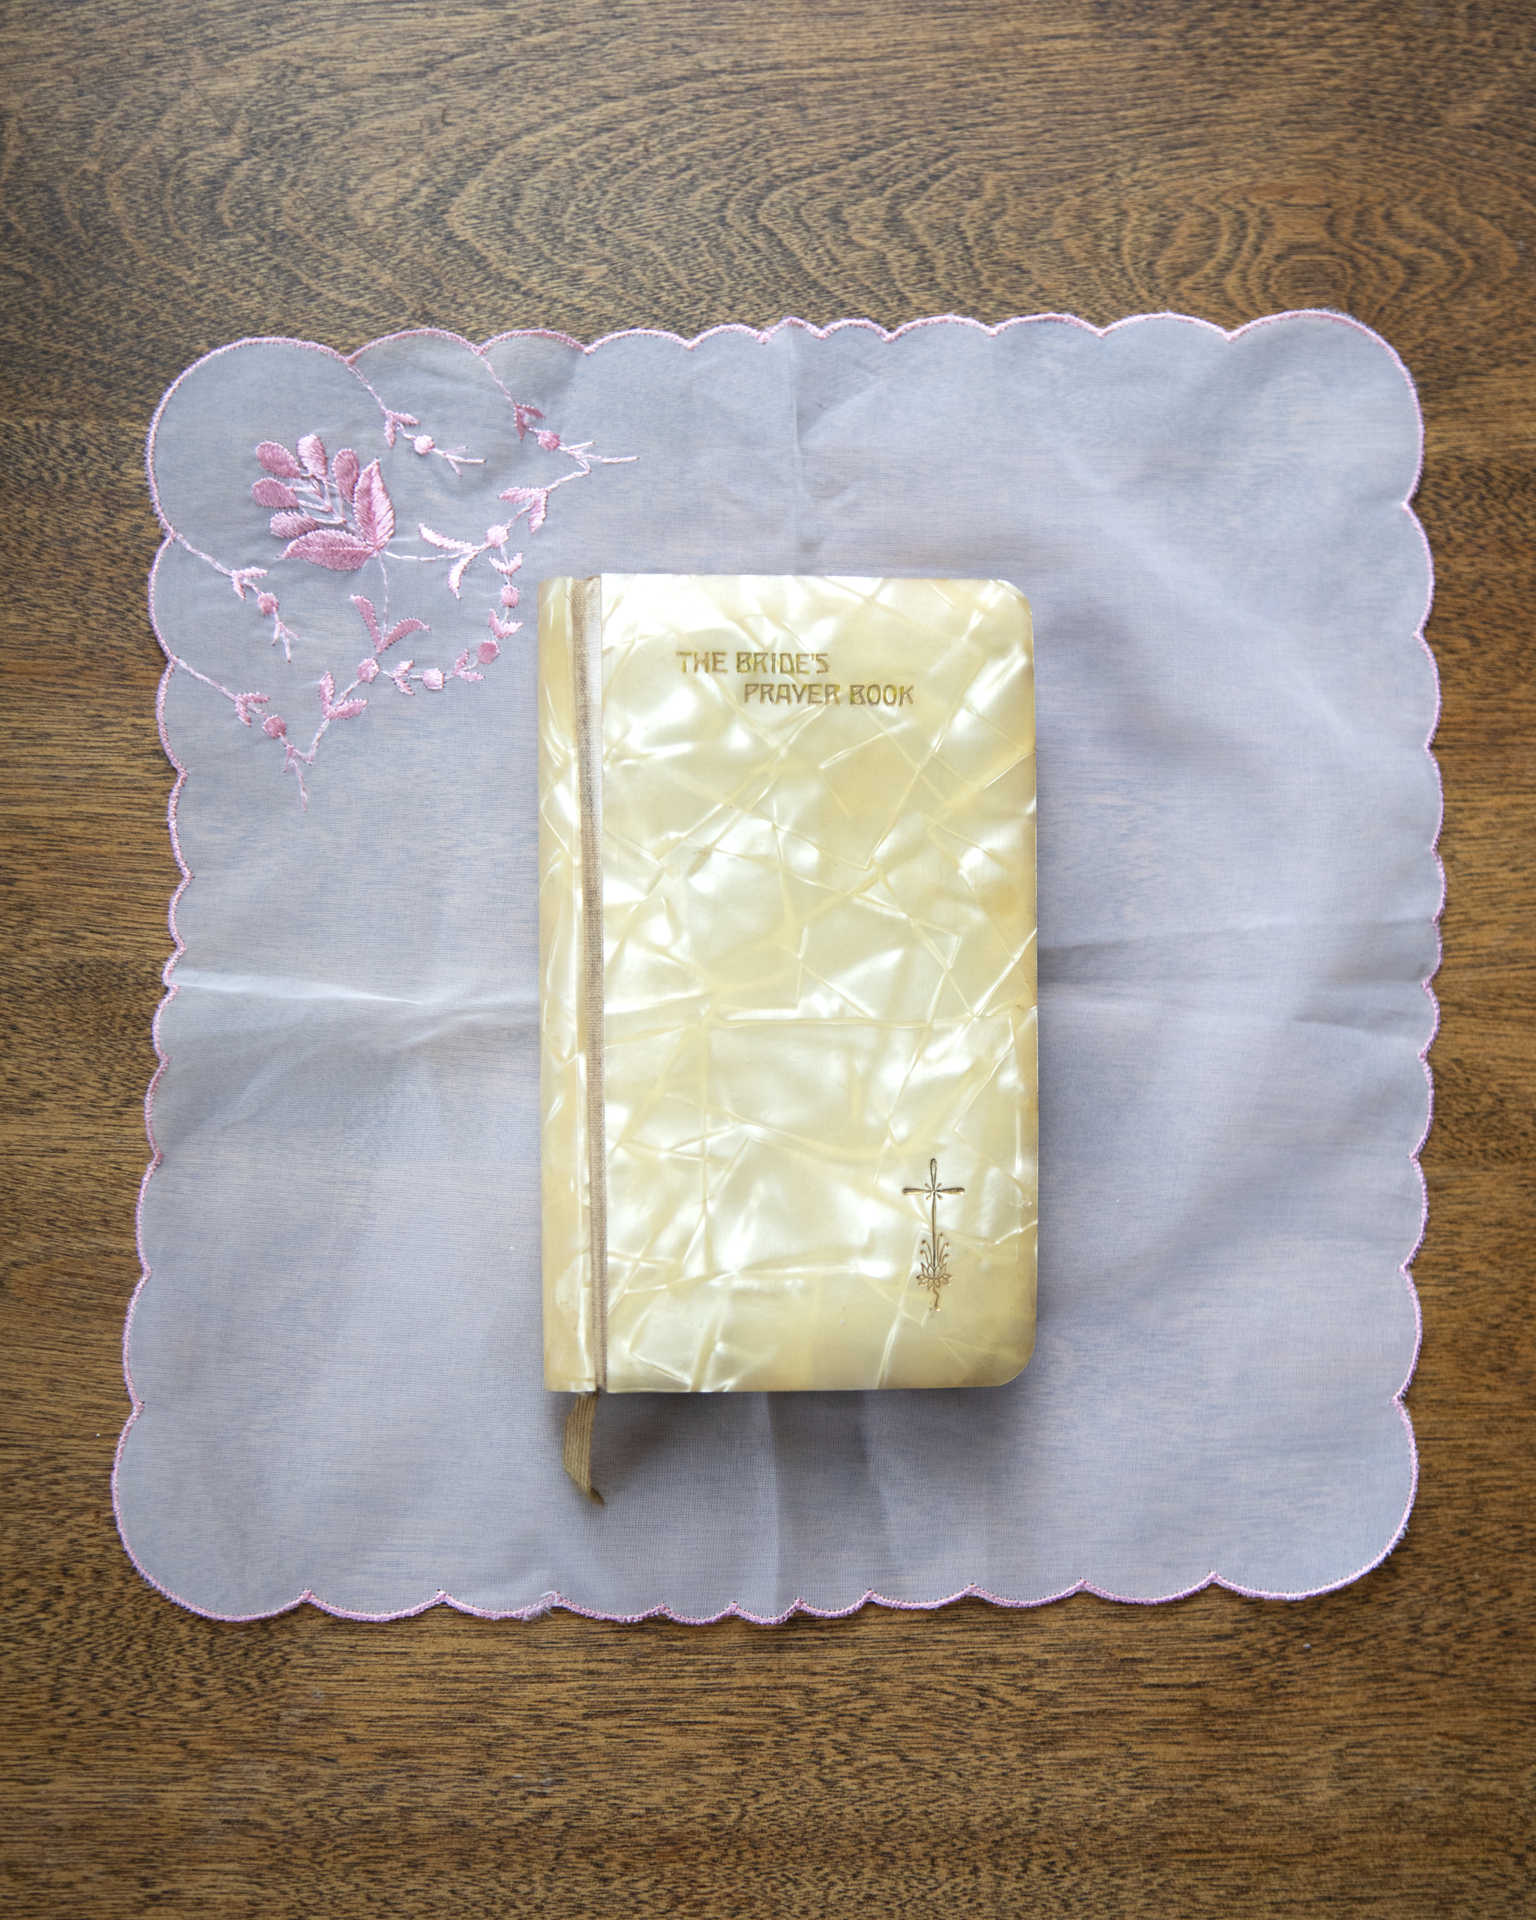 Gram's Bible: A small yellow book titled " The brides bible" sits on top of a white doily with pink trim, which is on a wooden table.